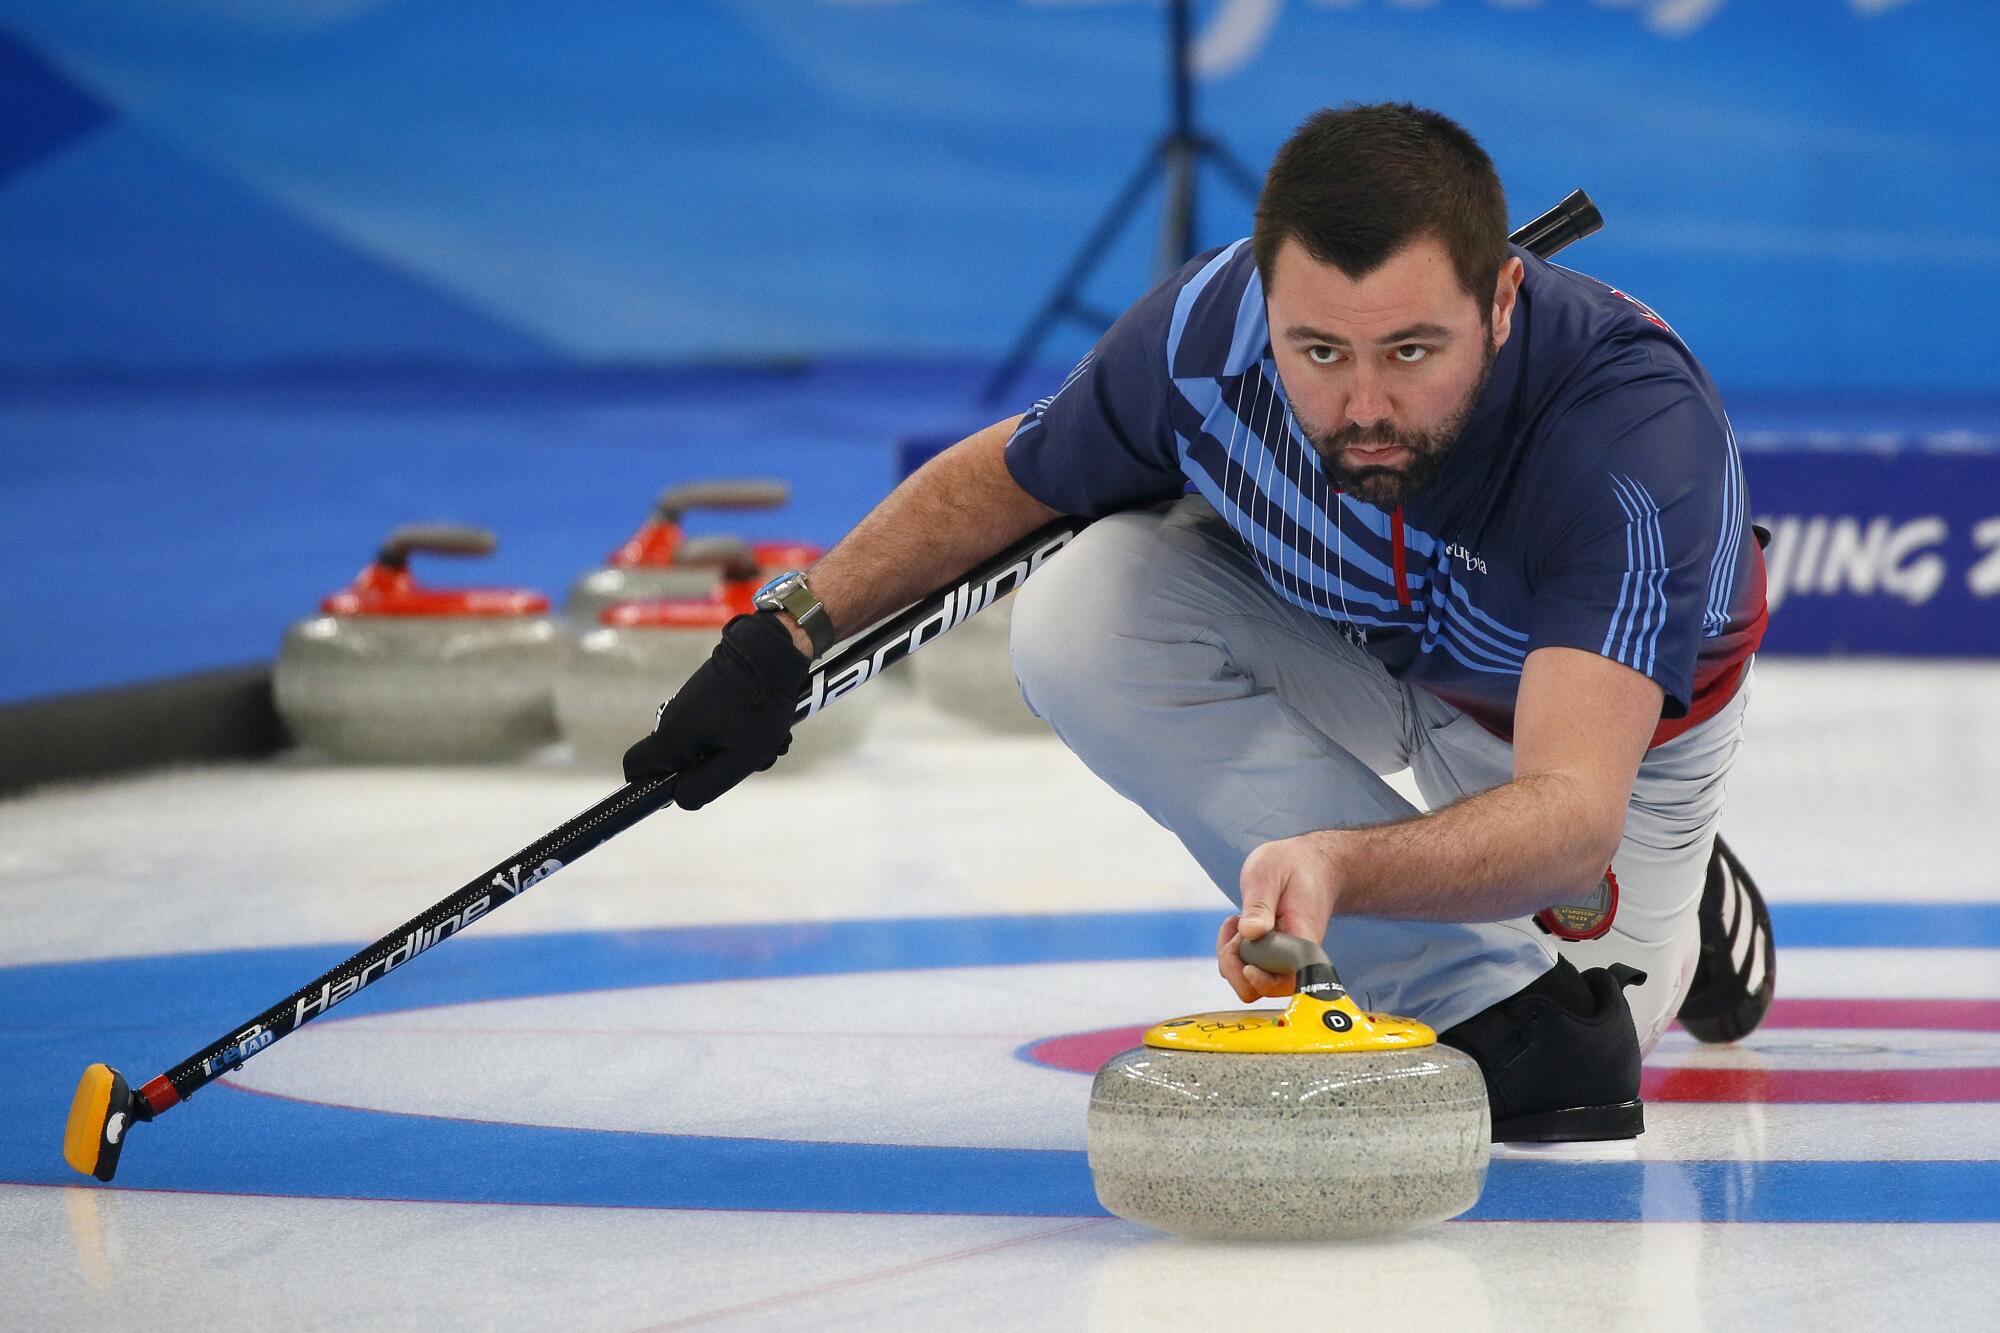 18 Captivating Facts About Curling